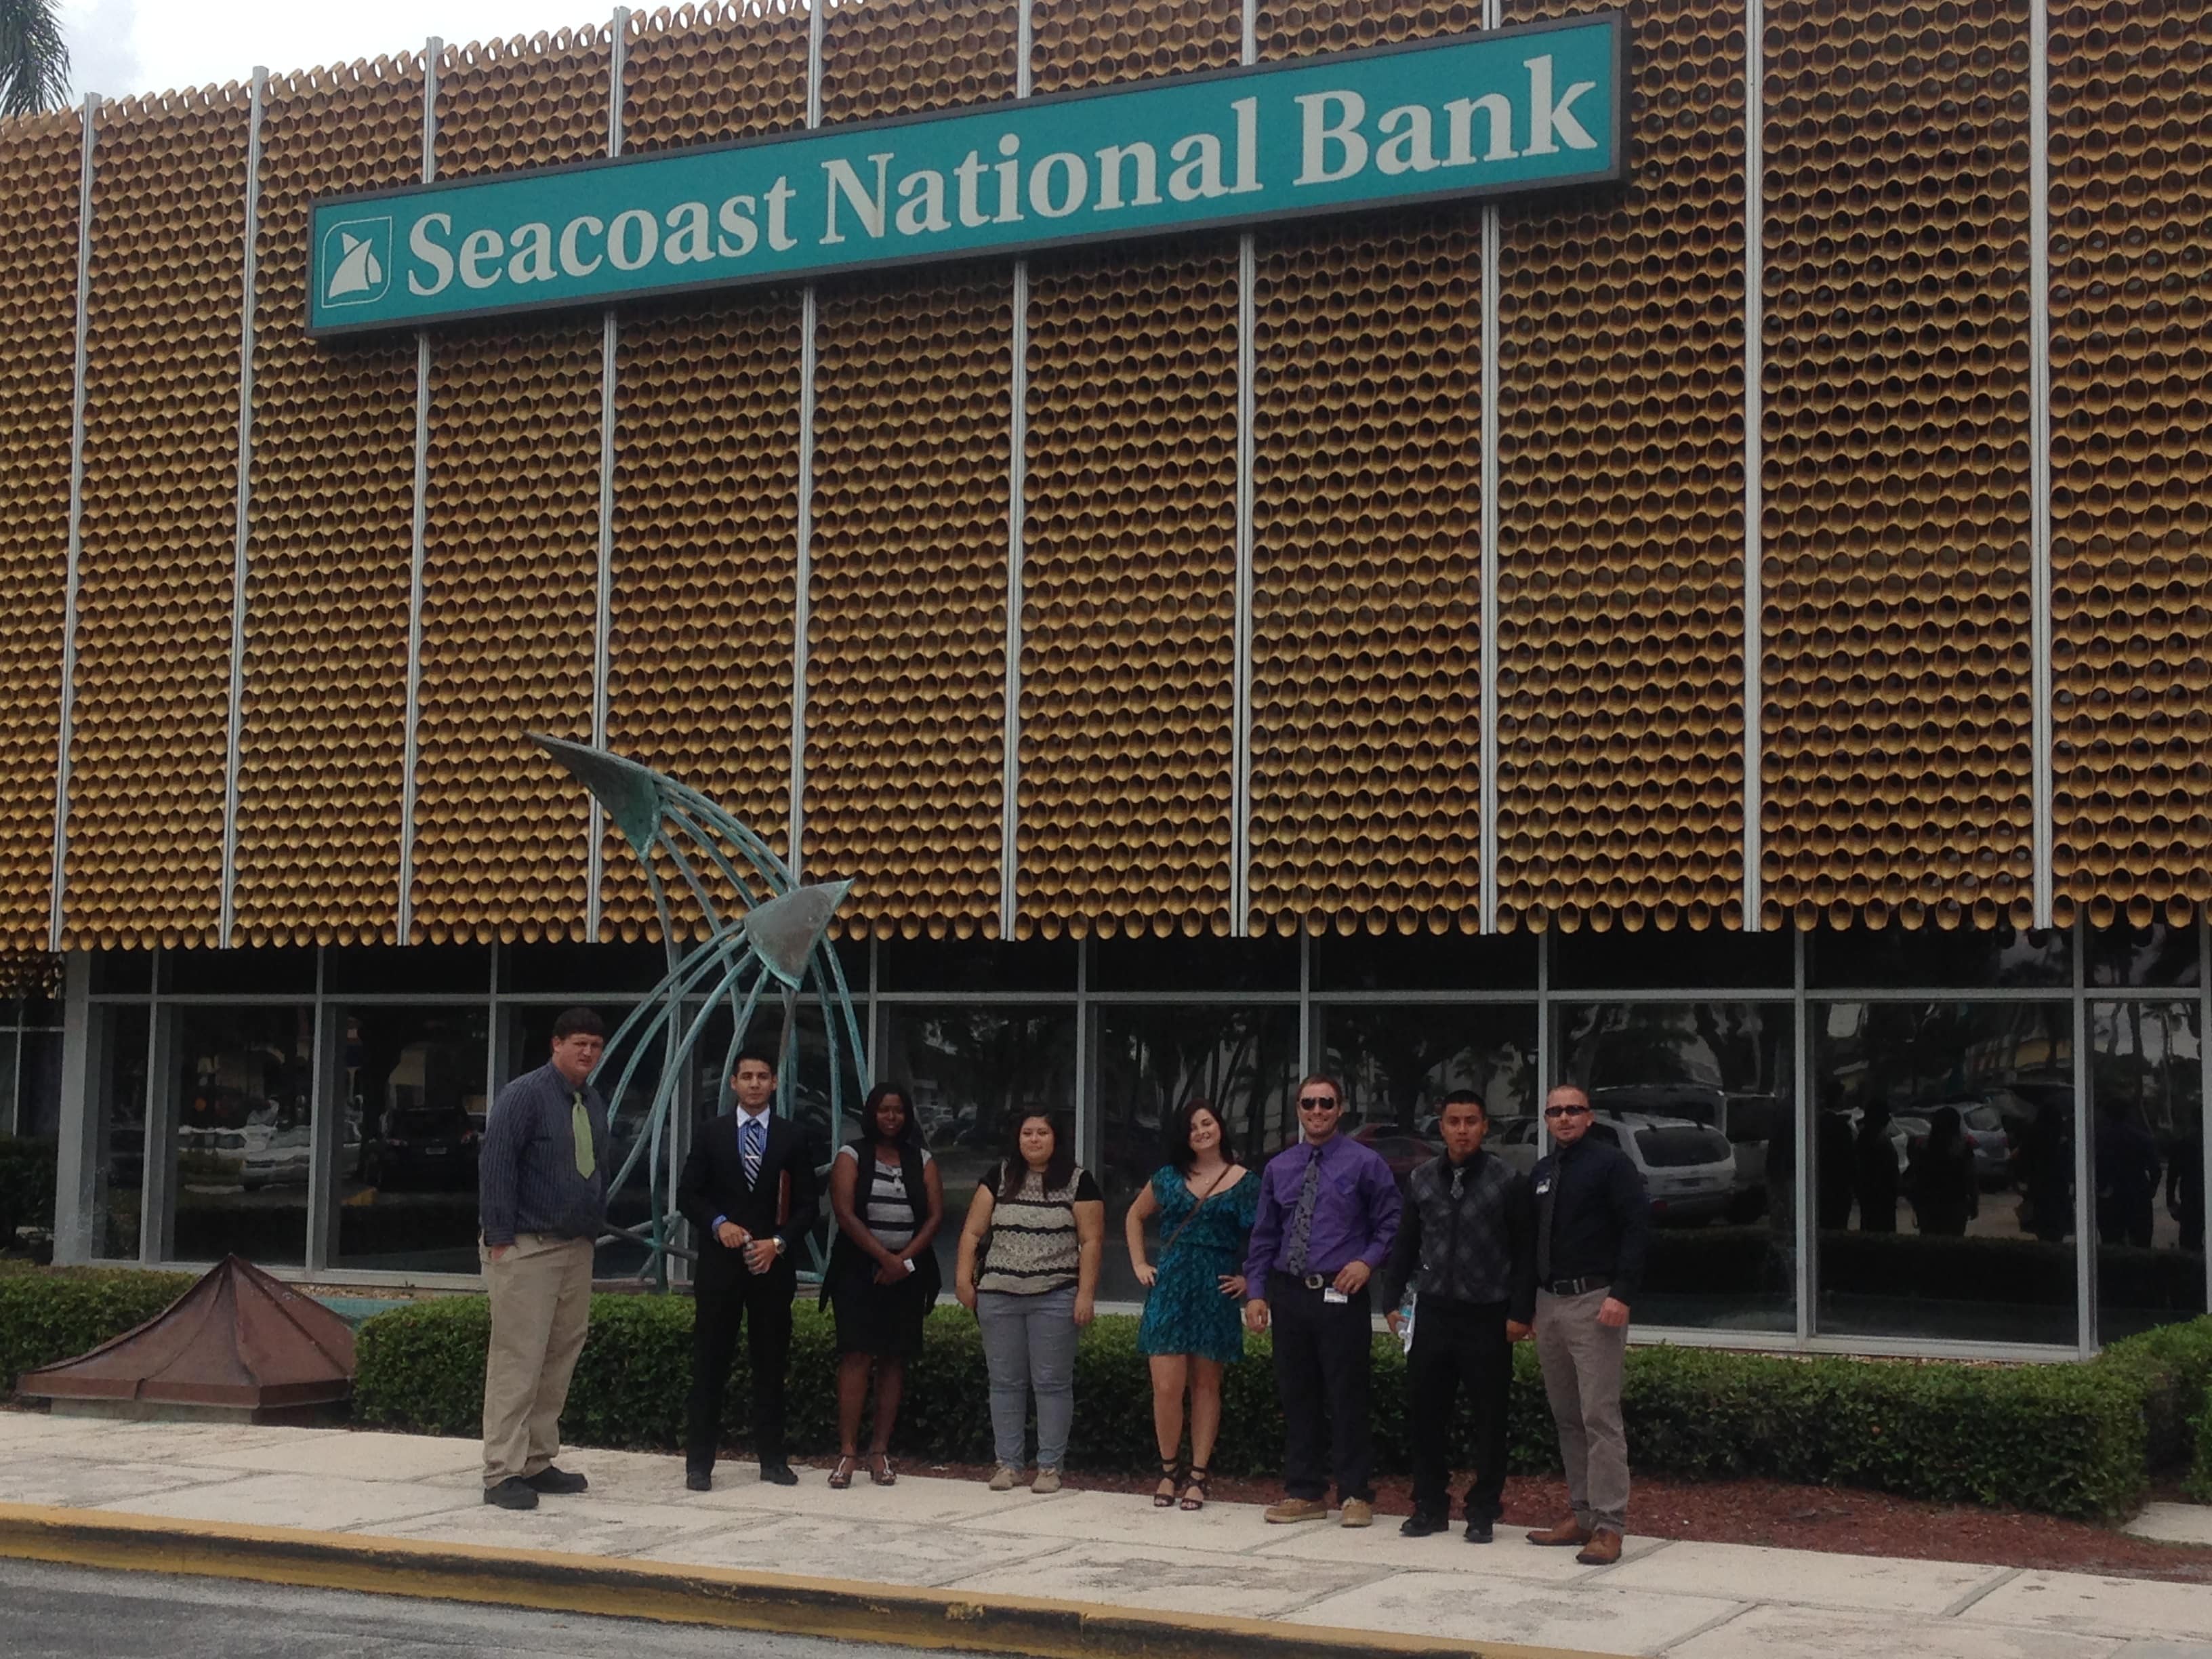 Students From the Port St. Lucie Campus Meet with Top Executives at Seacoast National Bank